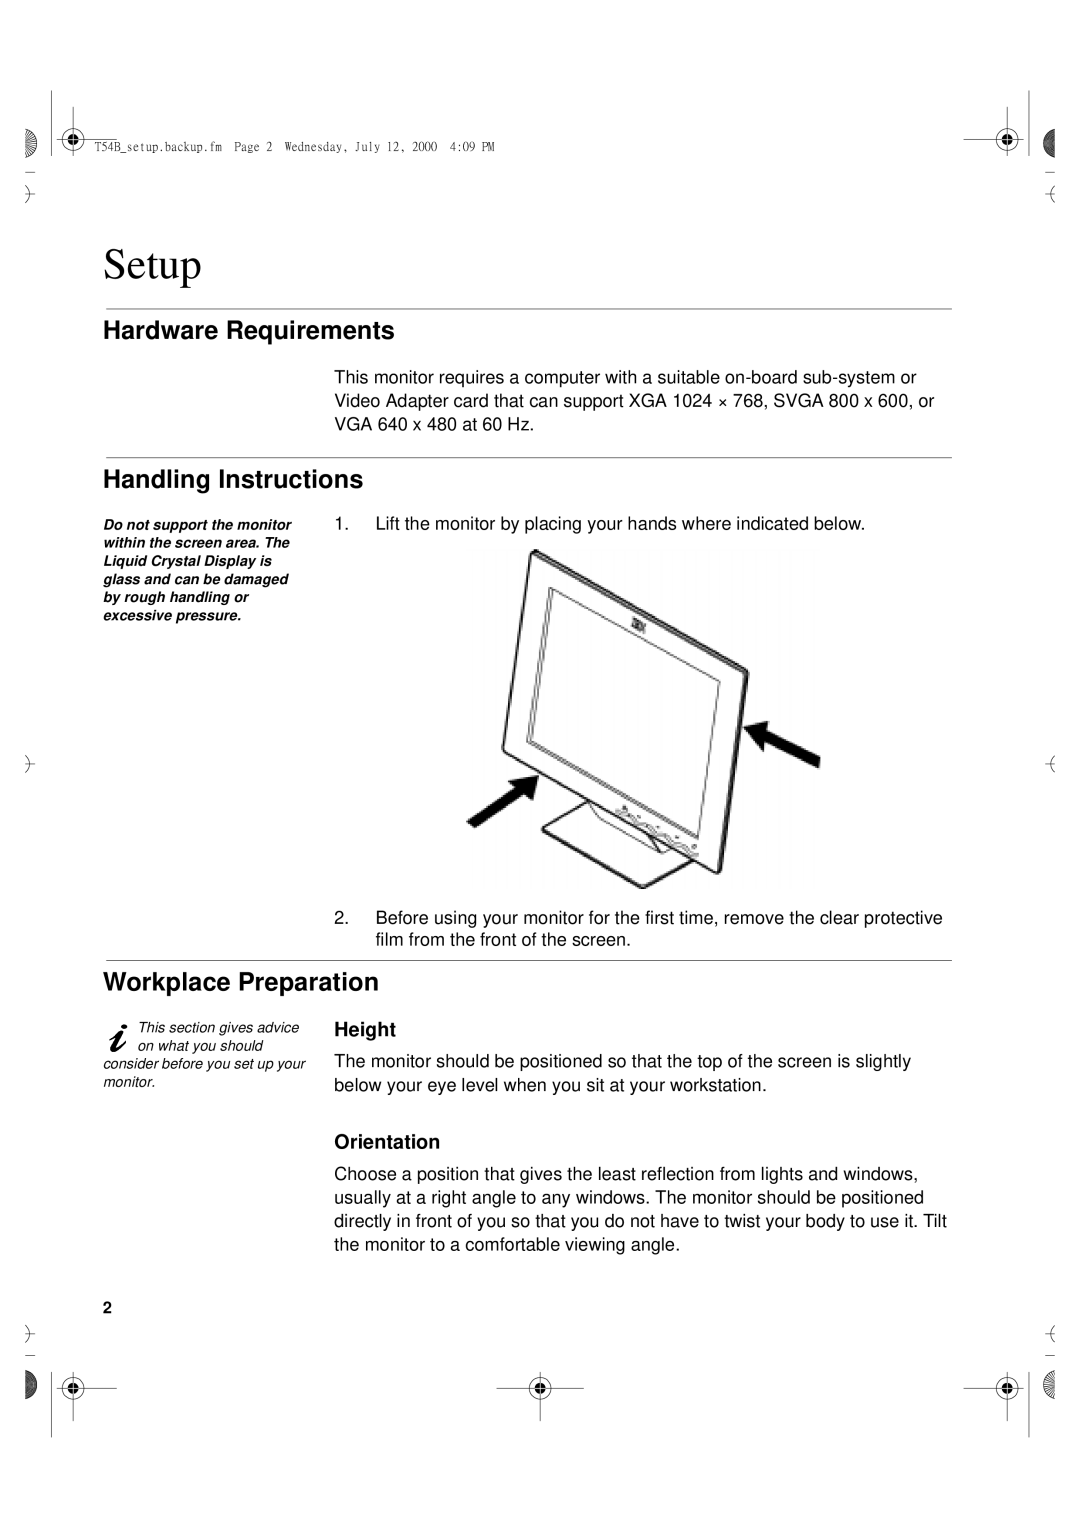 Lenovo T54H manual Setup, Hardware Requirements, Handling Instructions, Workplace Preparation, Height, Orientation 